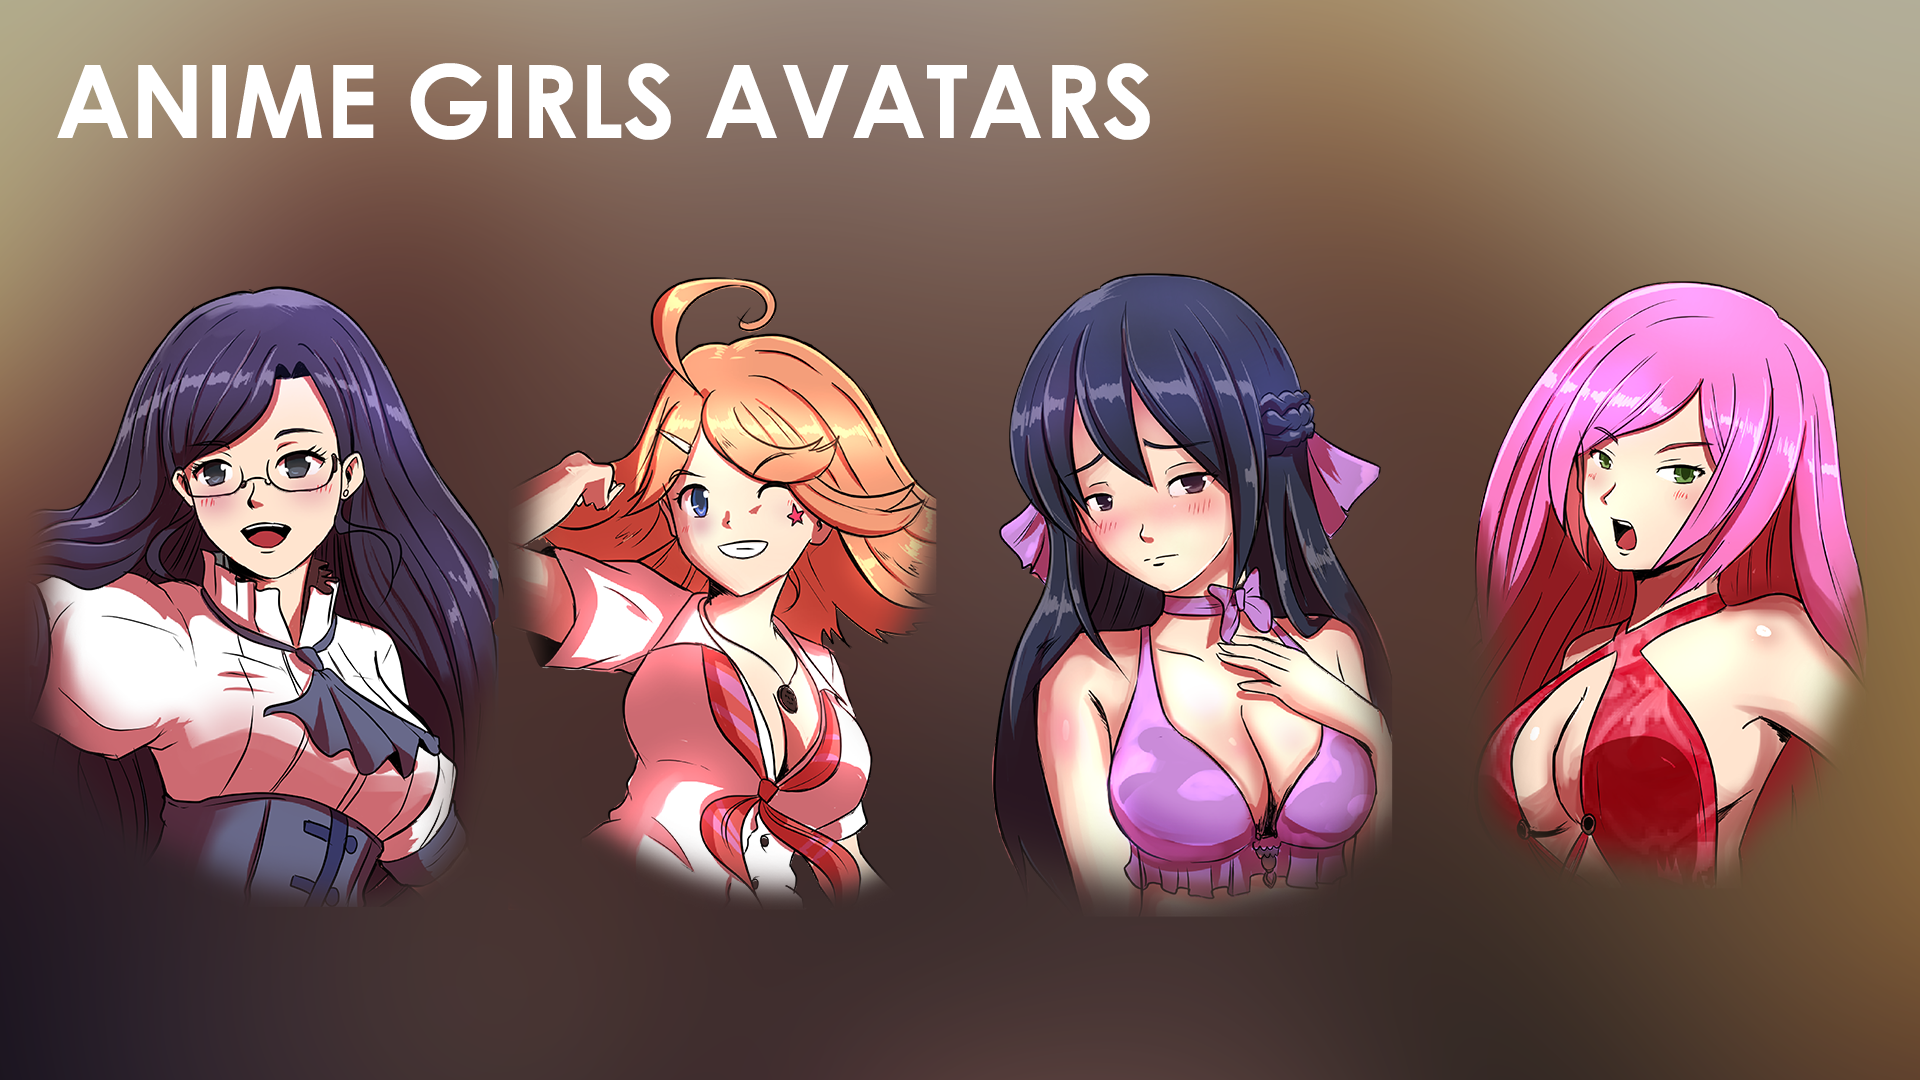 Anime Girls Avatars by Unforgiven in 2D Assets